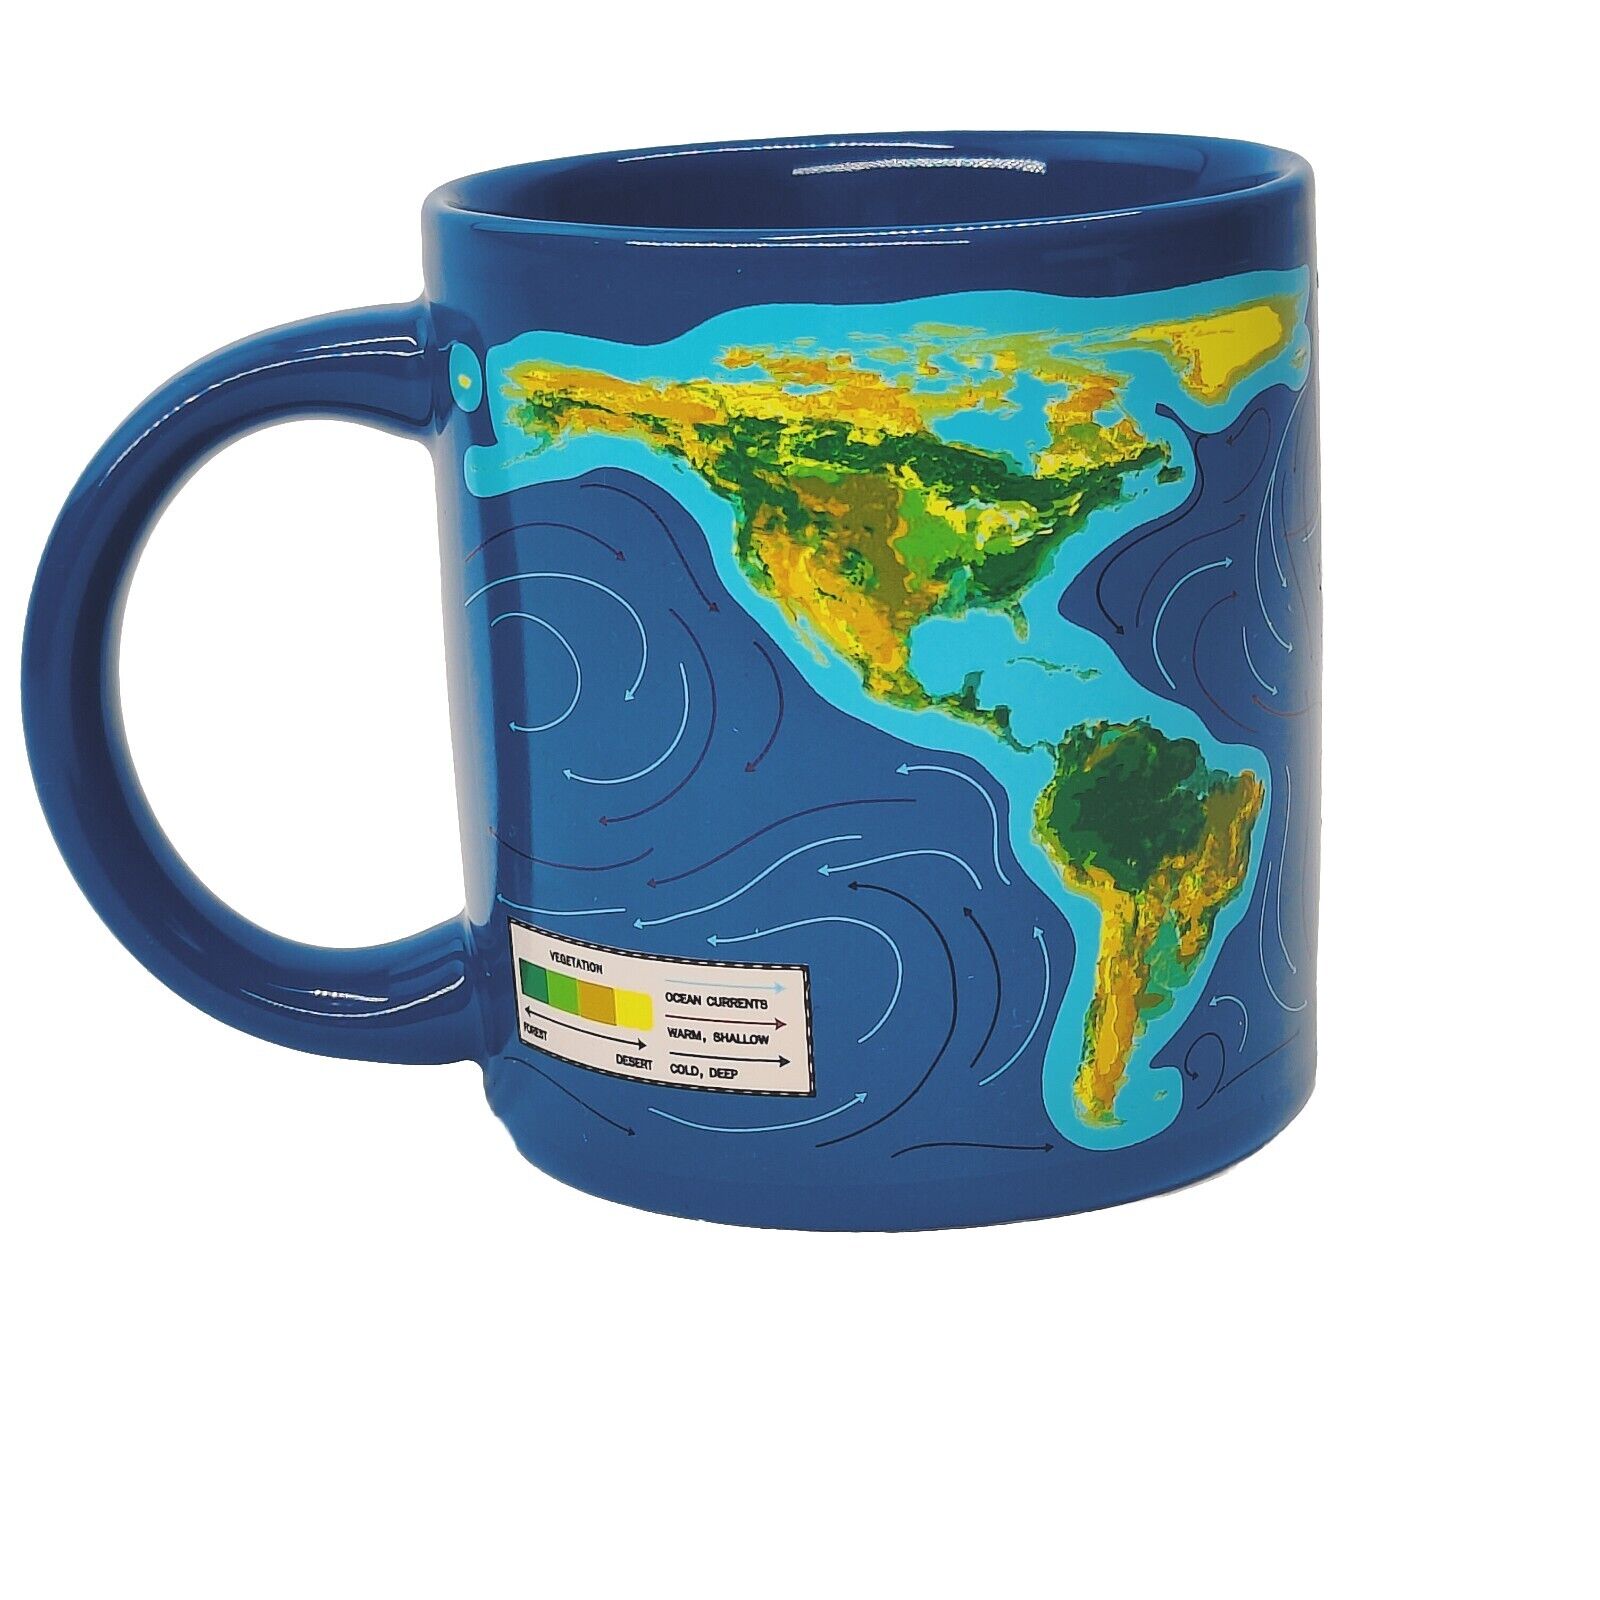 Climate Change 2015 Blue Teal Mug 12 oz Coffee Cup By Unemployed Philosopher